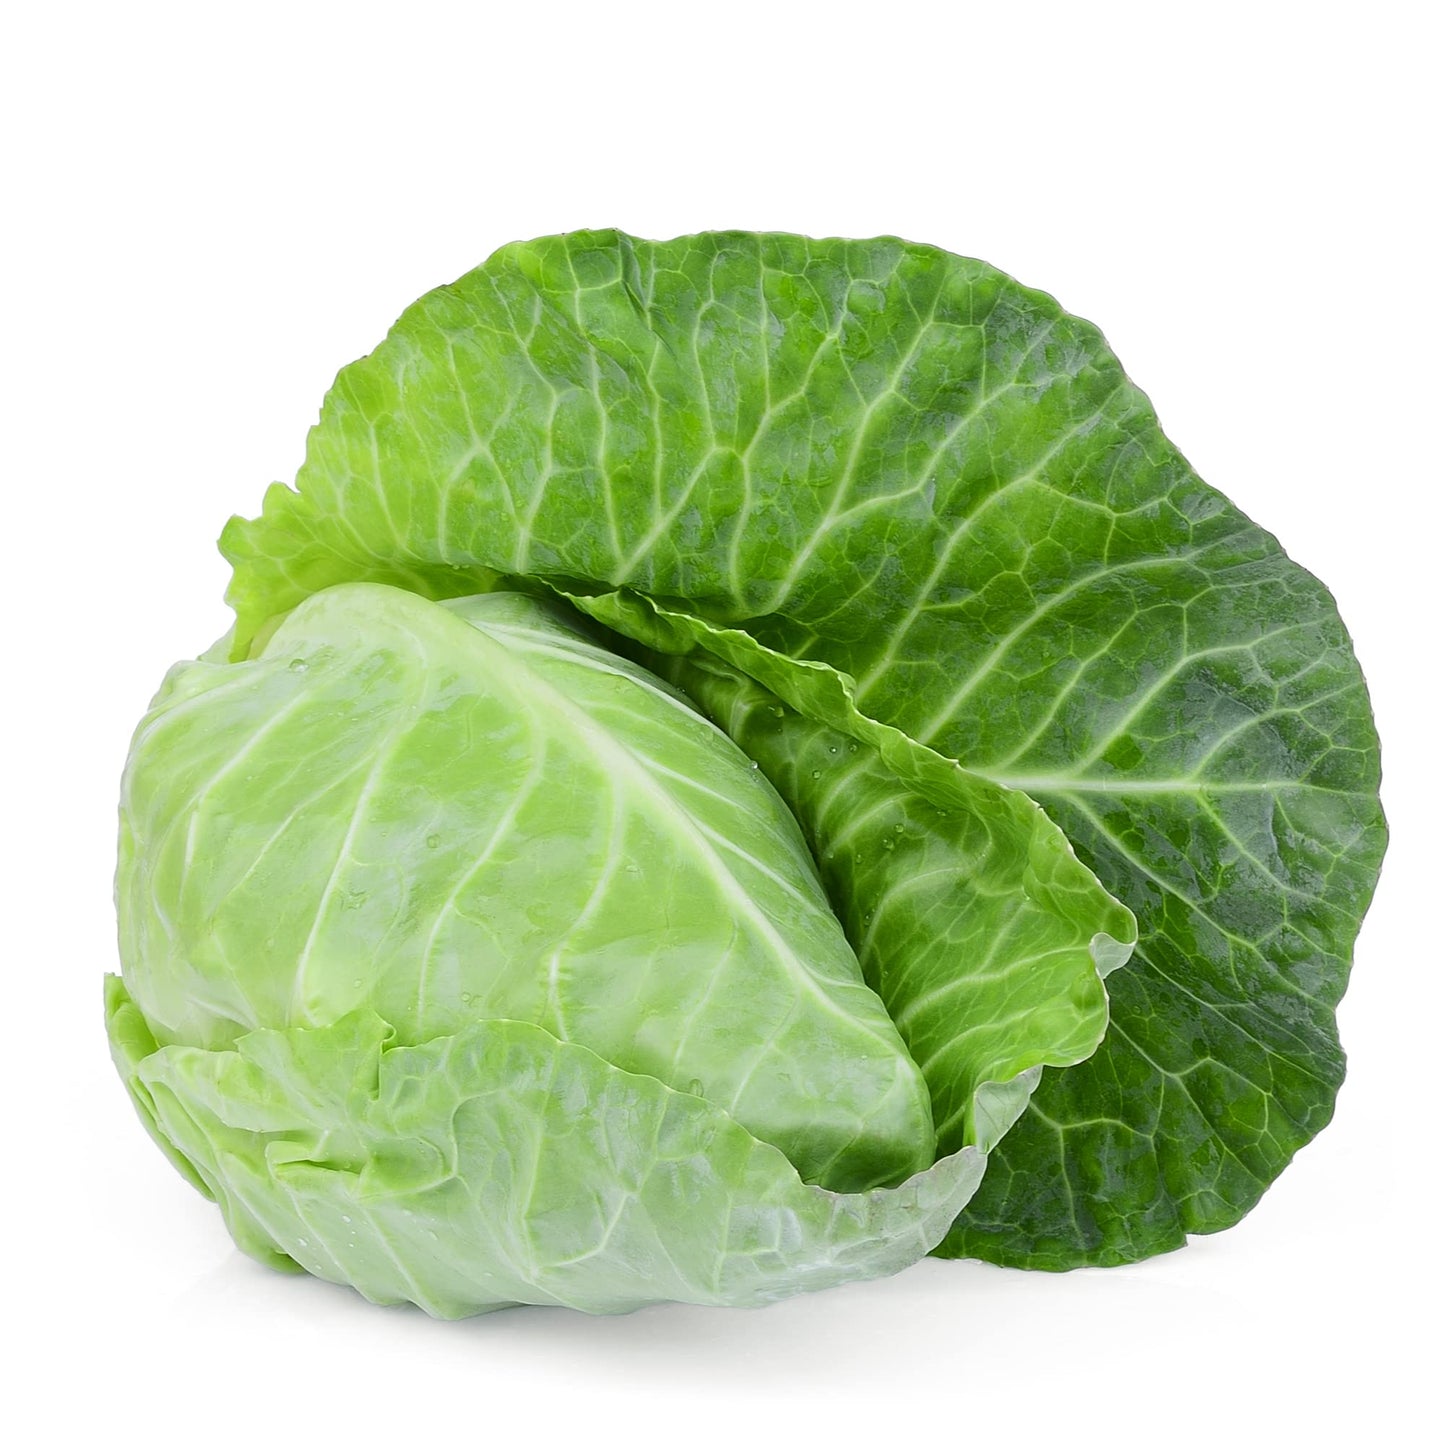 Cabbage 'Spring Duchy' - 12 x Large Plant Pack - AcquaGarden